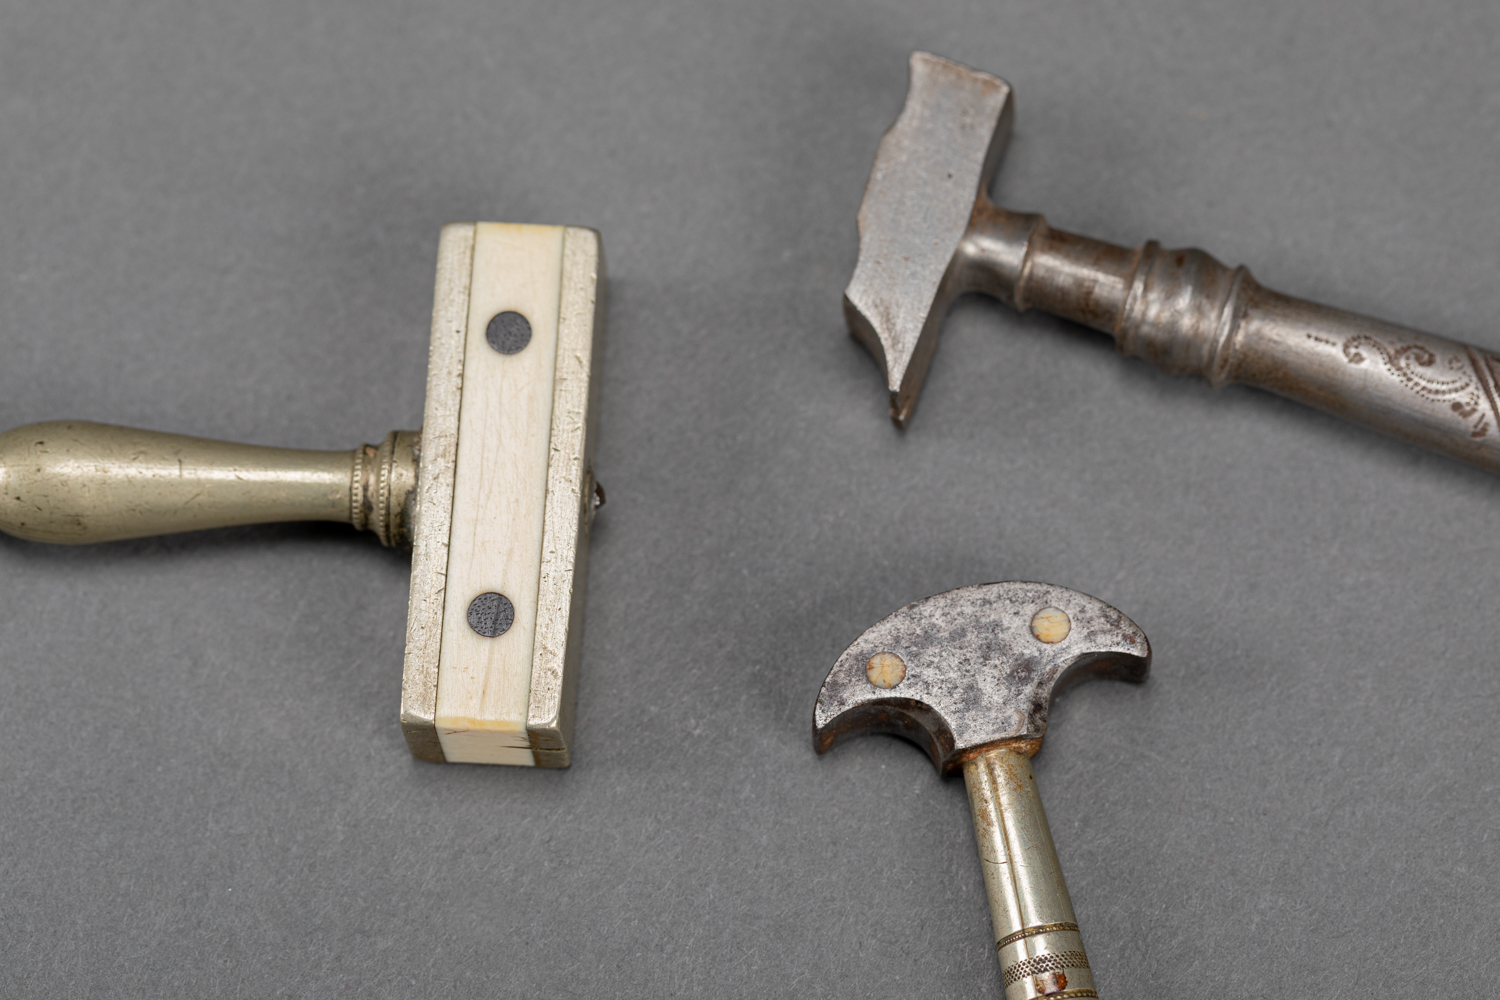 3 miniature tools, iron metal and others, 19. century - Image 3 of 3